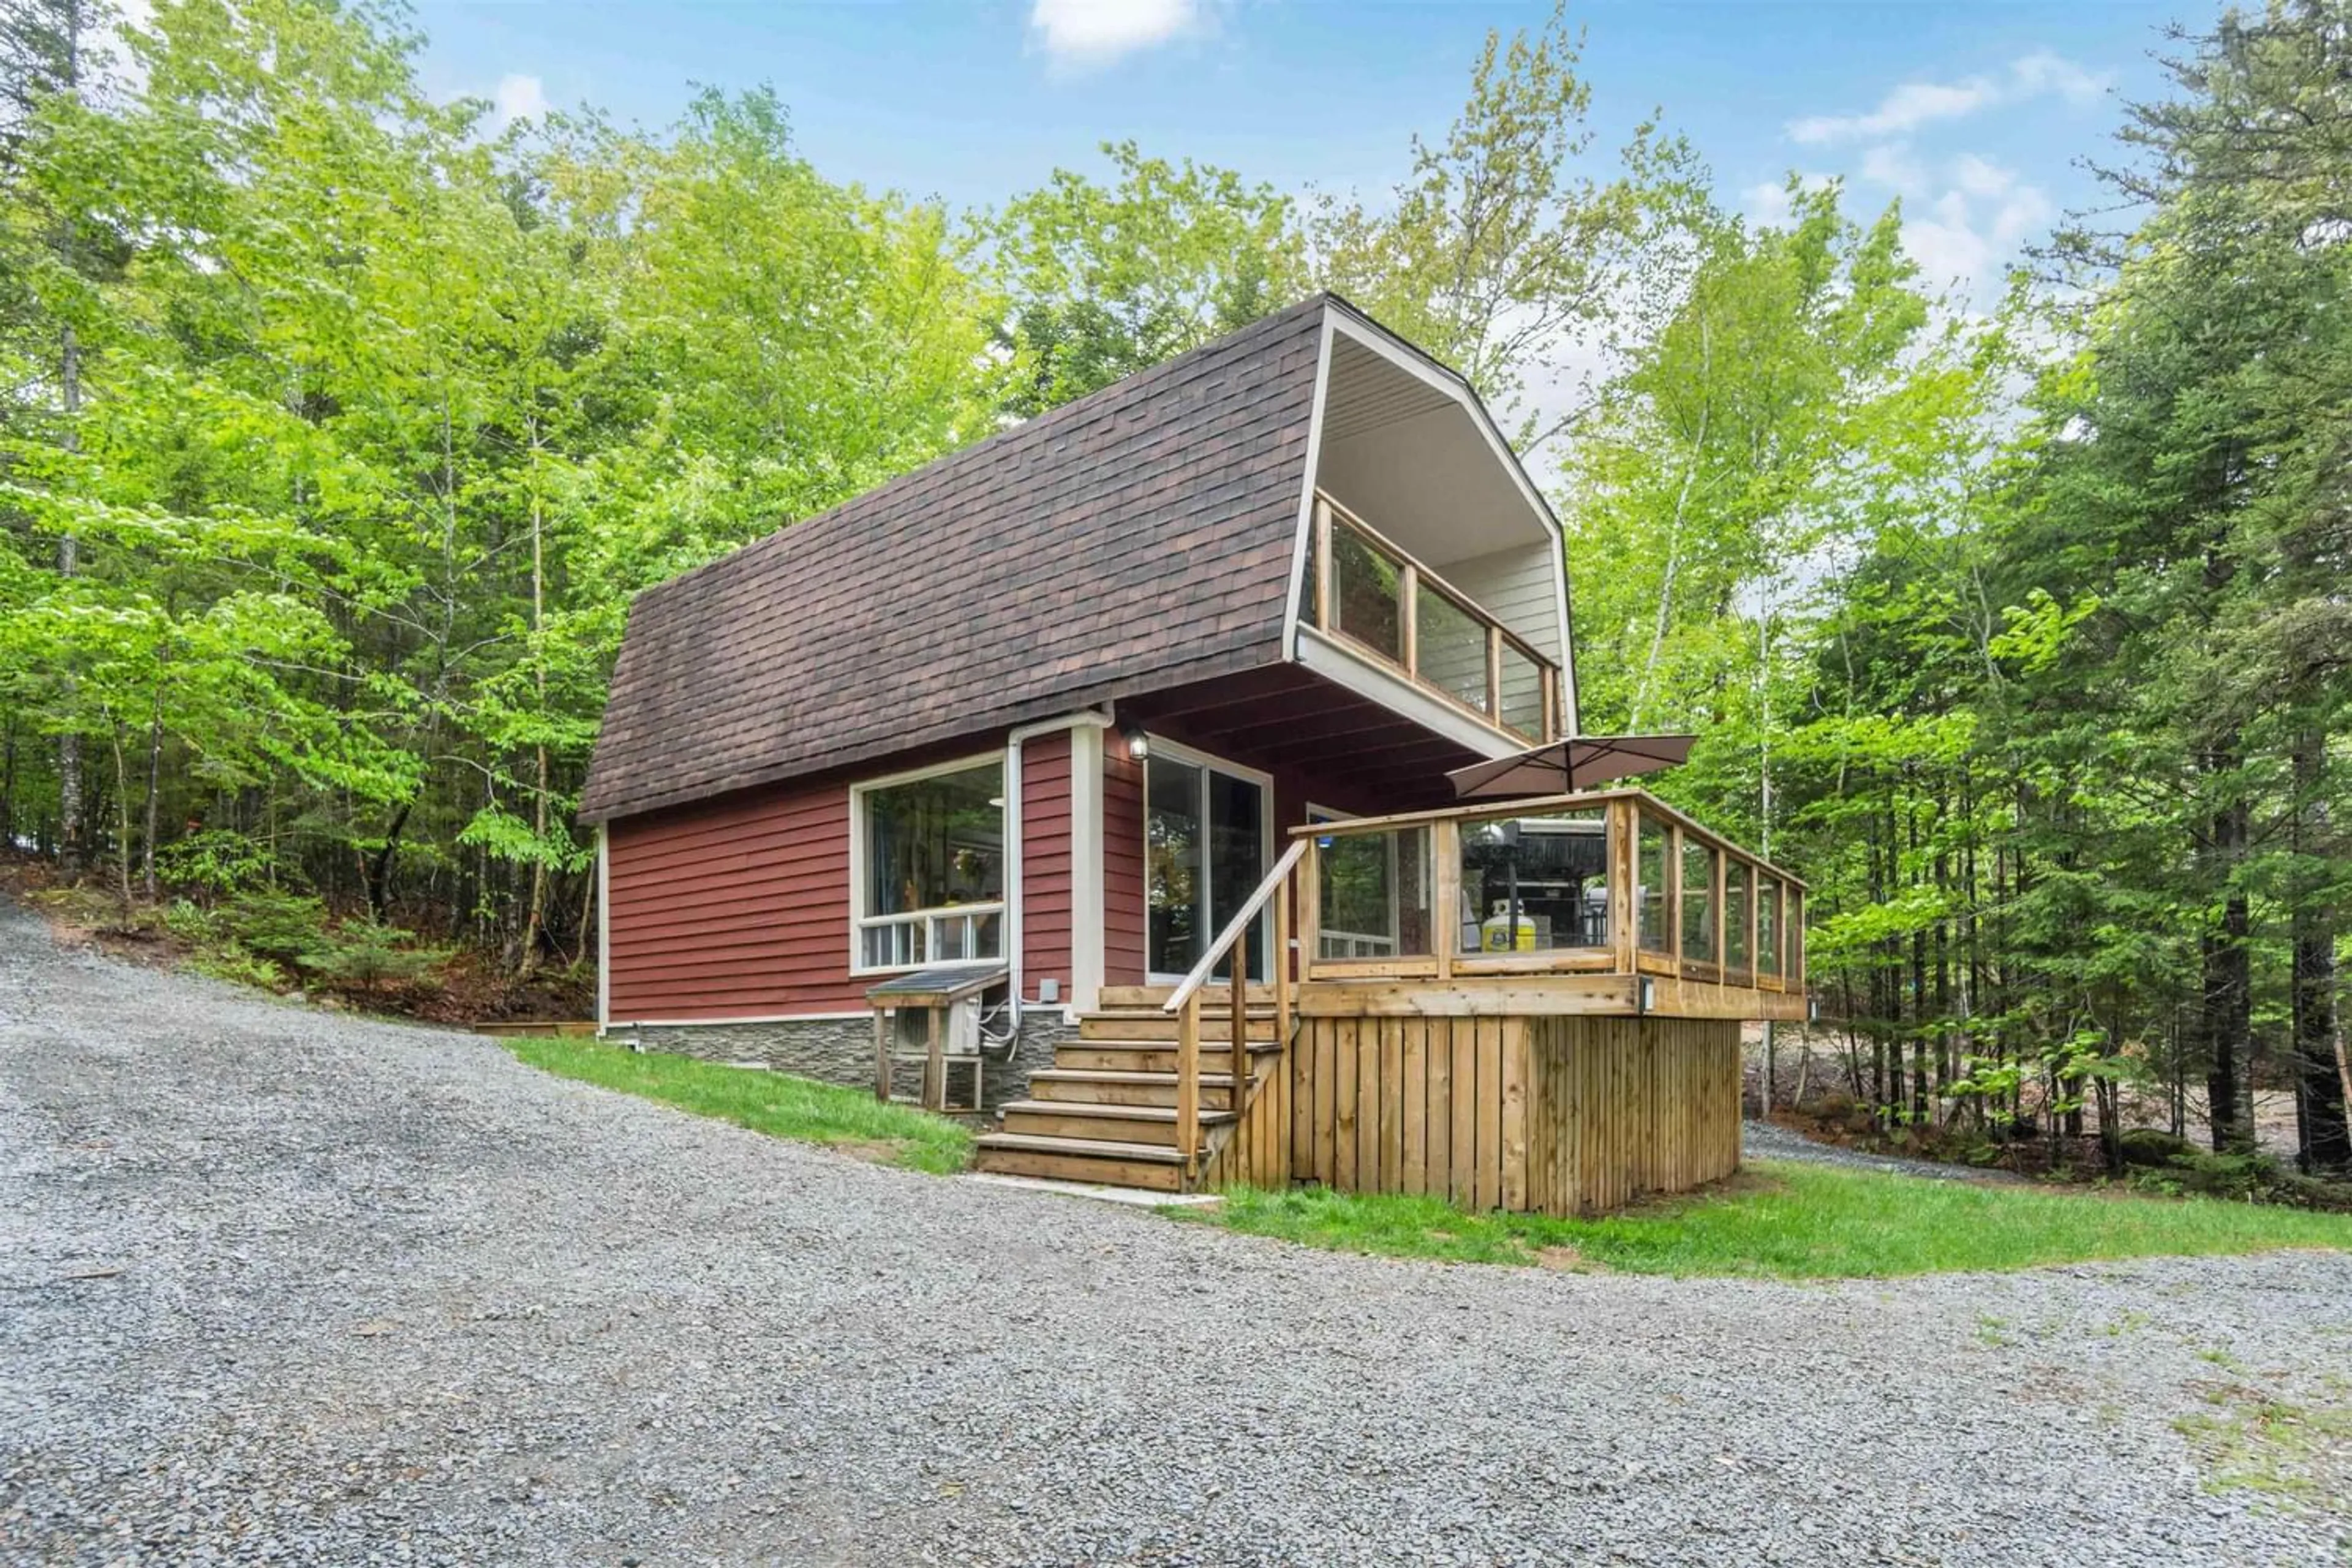 Cottage for 188 Stonebroke Rd, New Russell Nova Scotia B0T 2M0